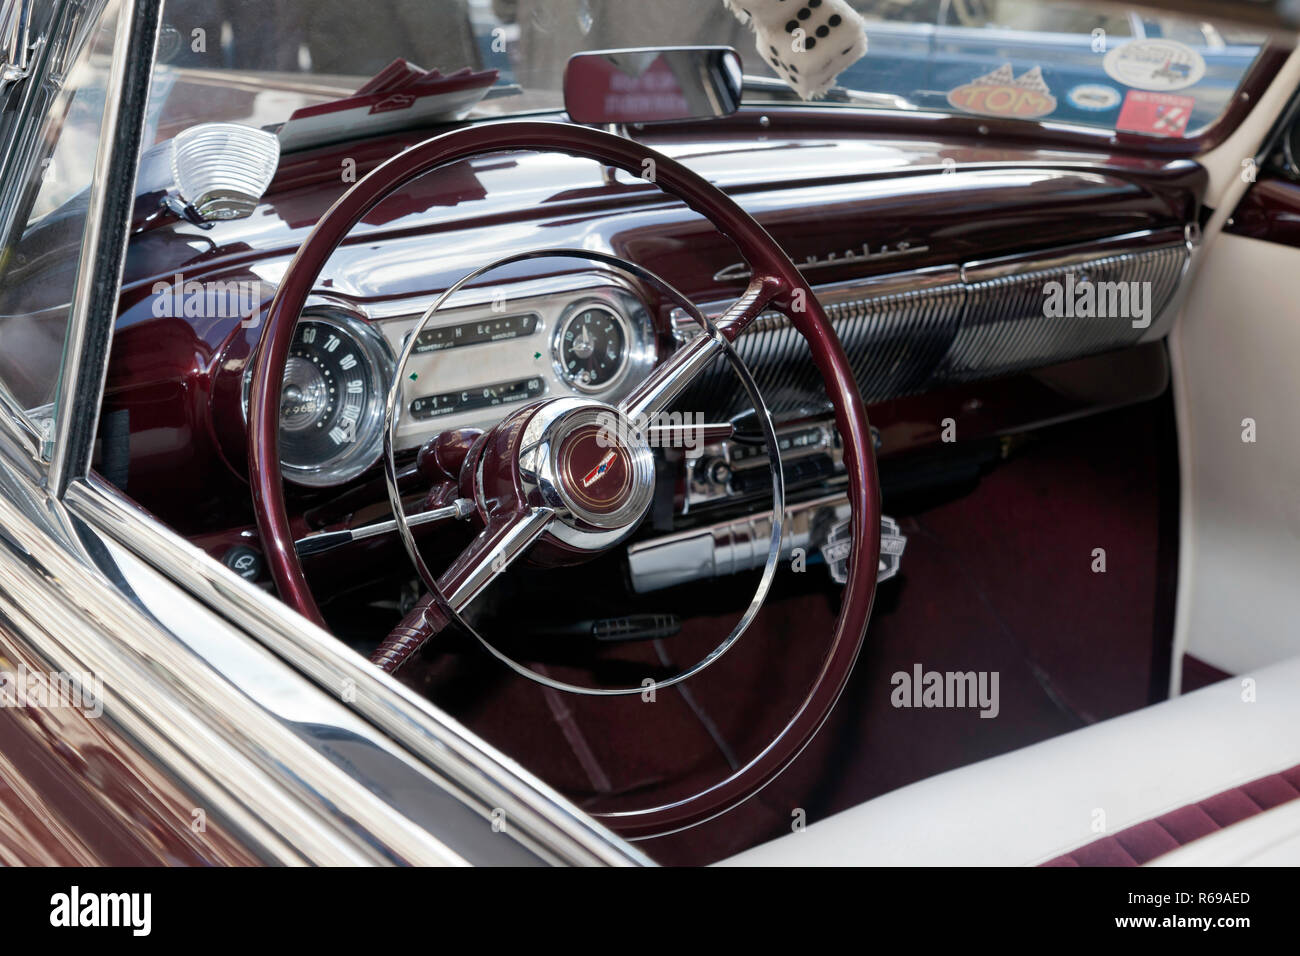 Interior view of a 1954 Chevrolet Bel Air, on display at the 2018 Regents Street Motor Show Stock Photo